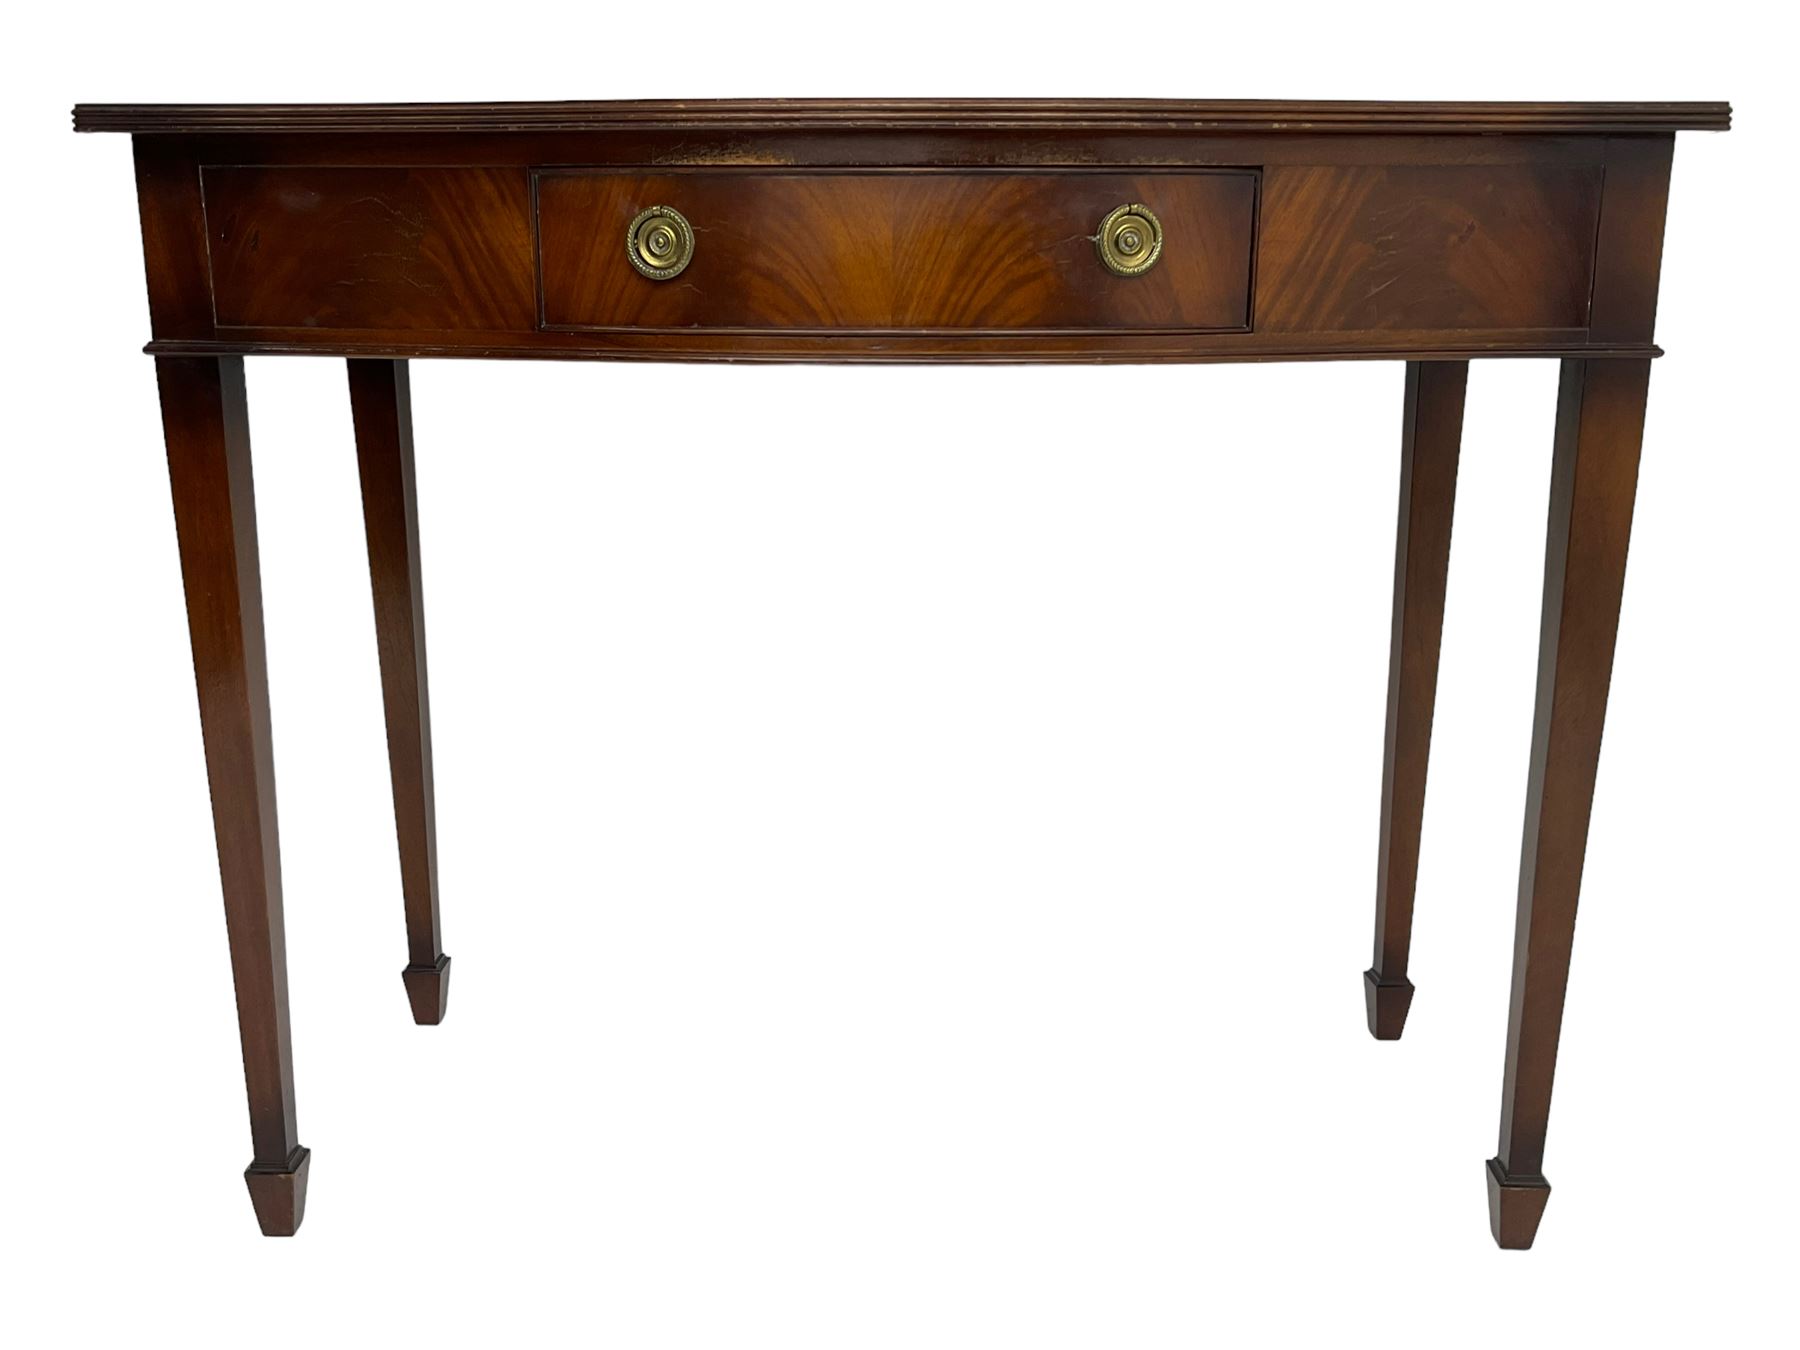 Georgian design mahogany serpentine fronted side table